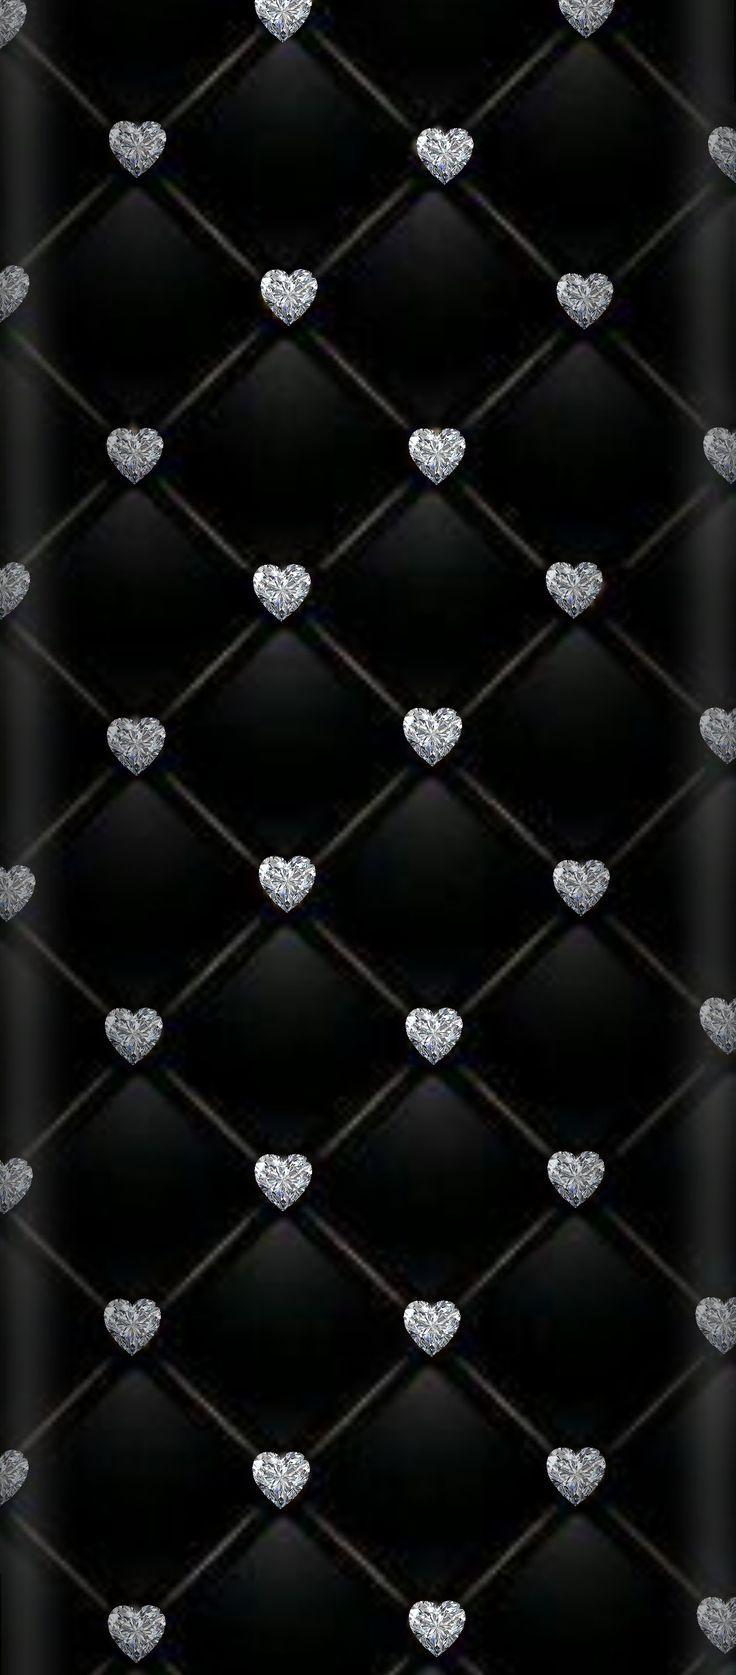 Wallpaper Background Black Diamonds Hearts Curved Android